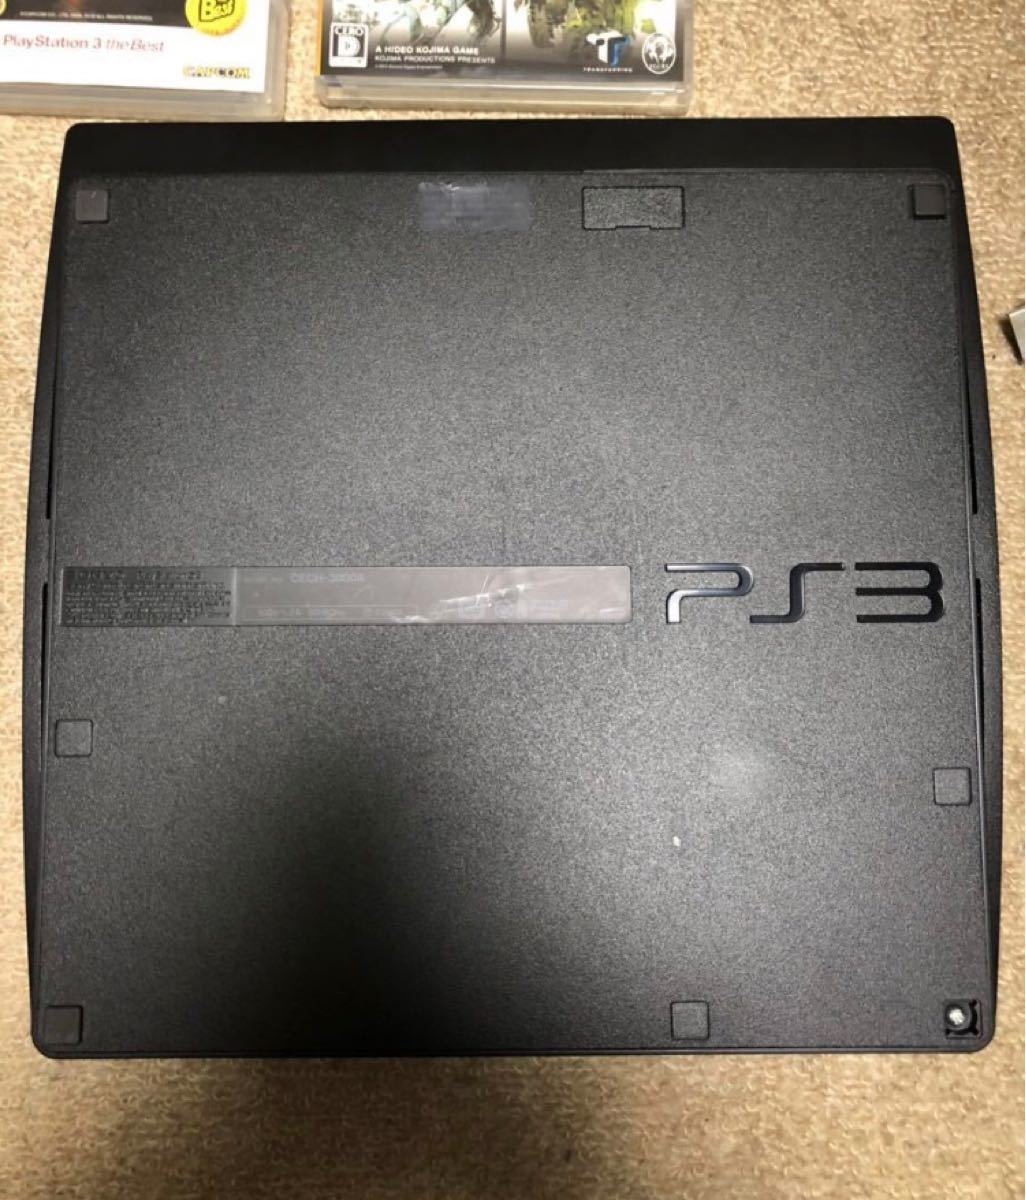 PS3 本体　CECH-3000A ソフト7本セット